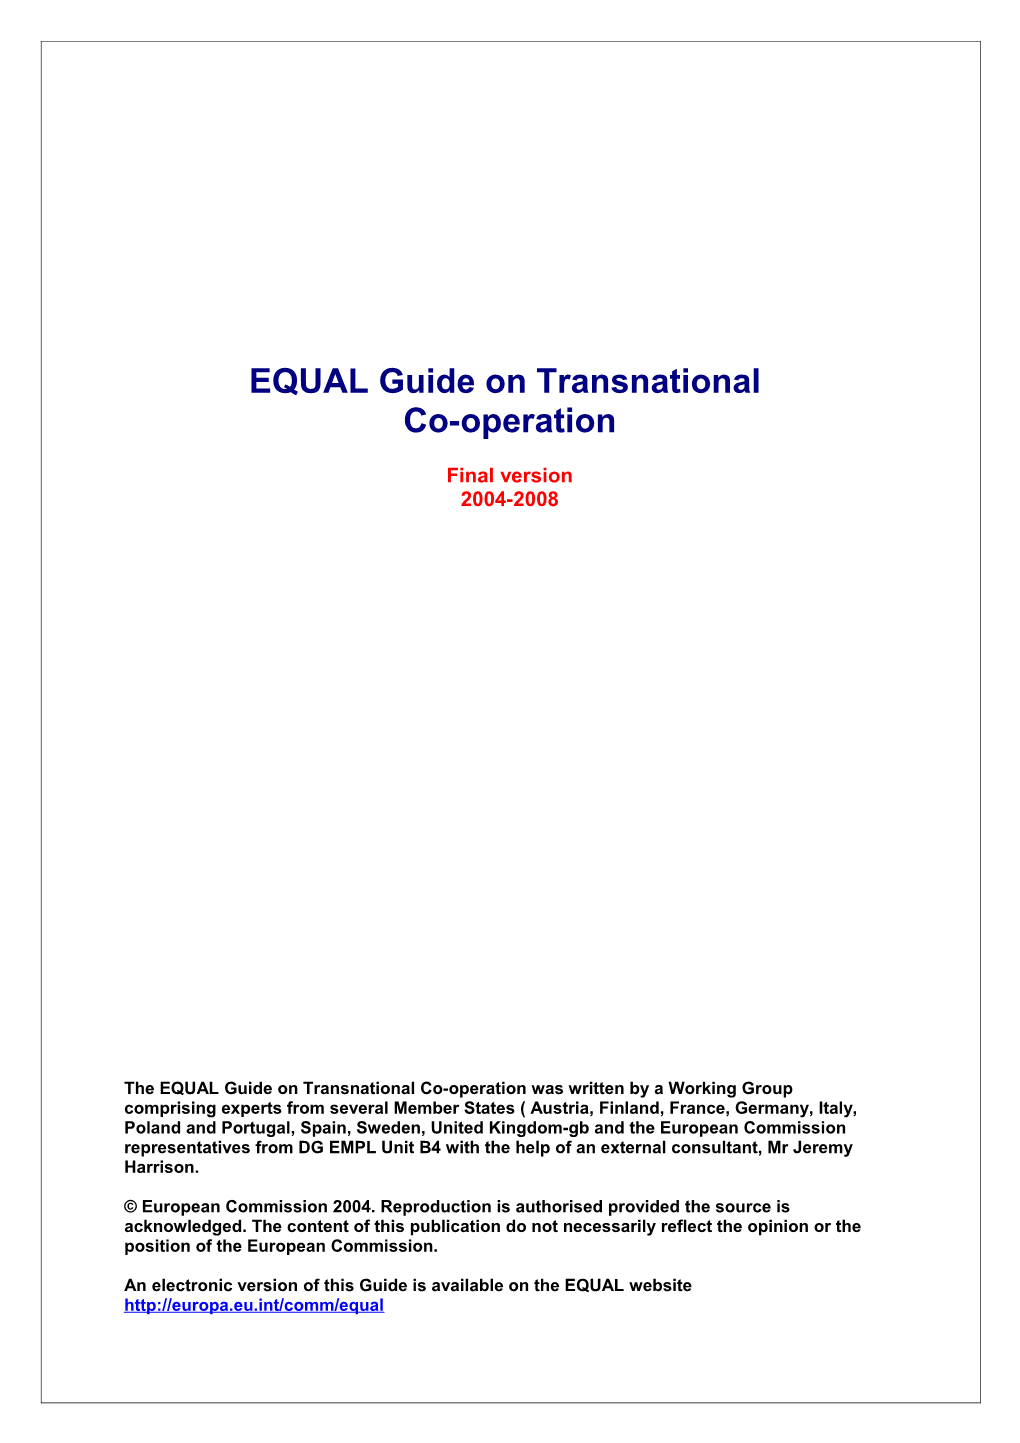 EQUAL Guide on Transnationality